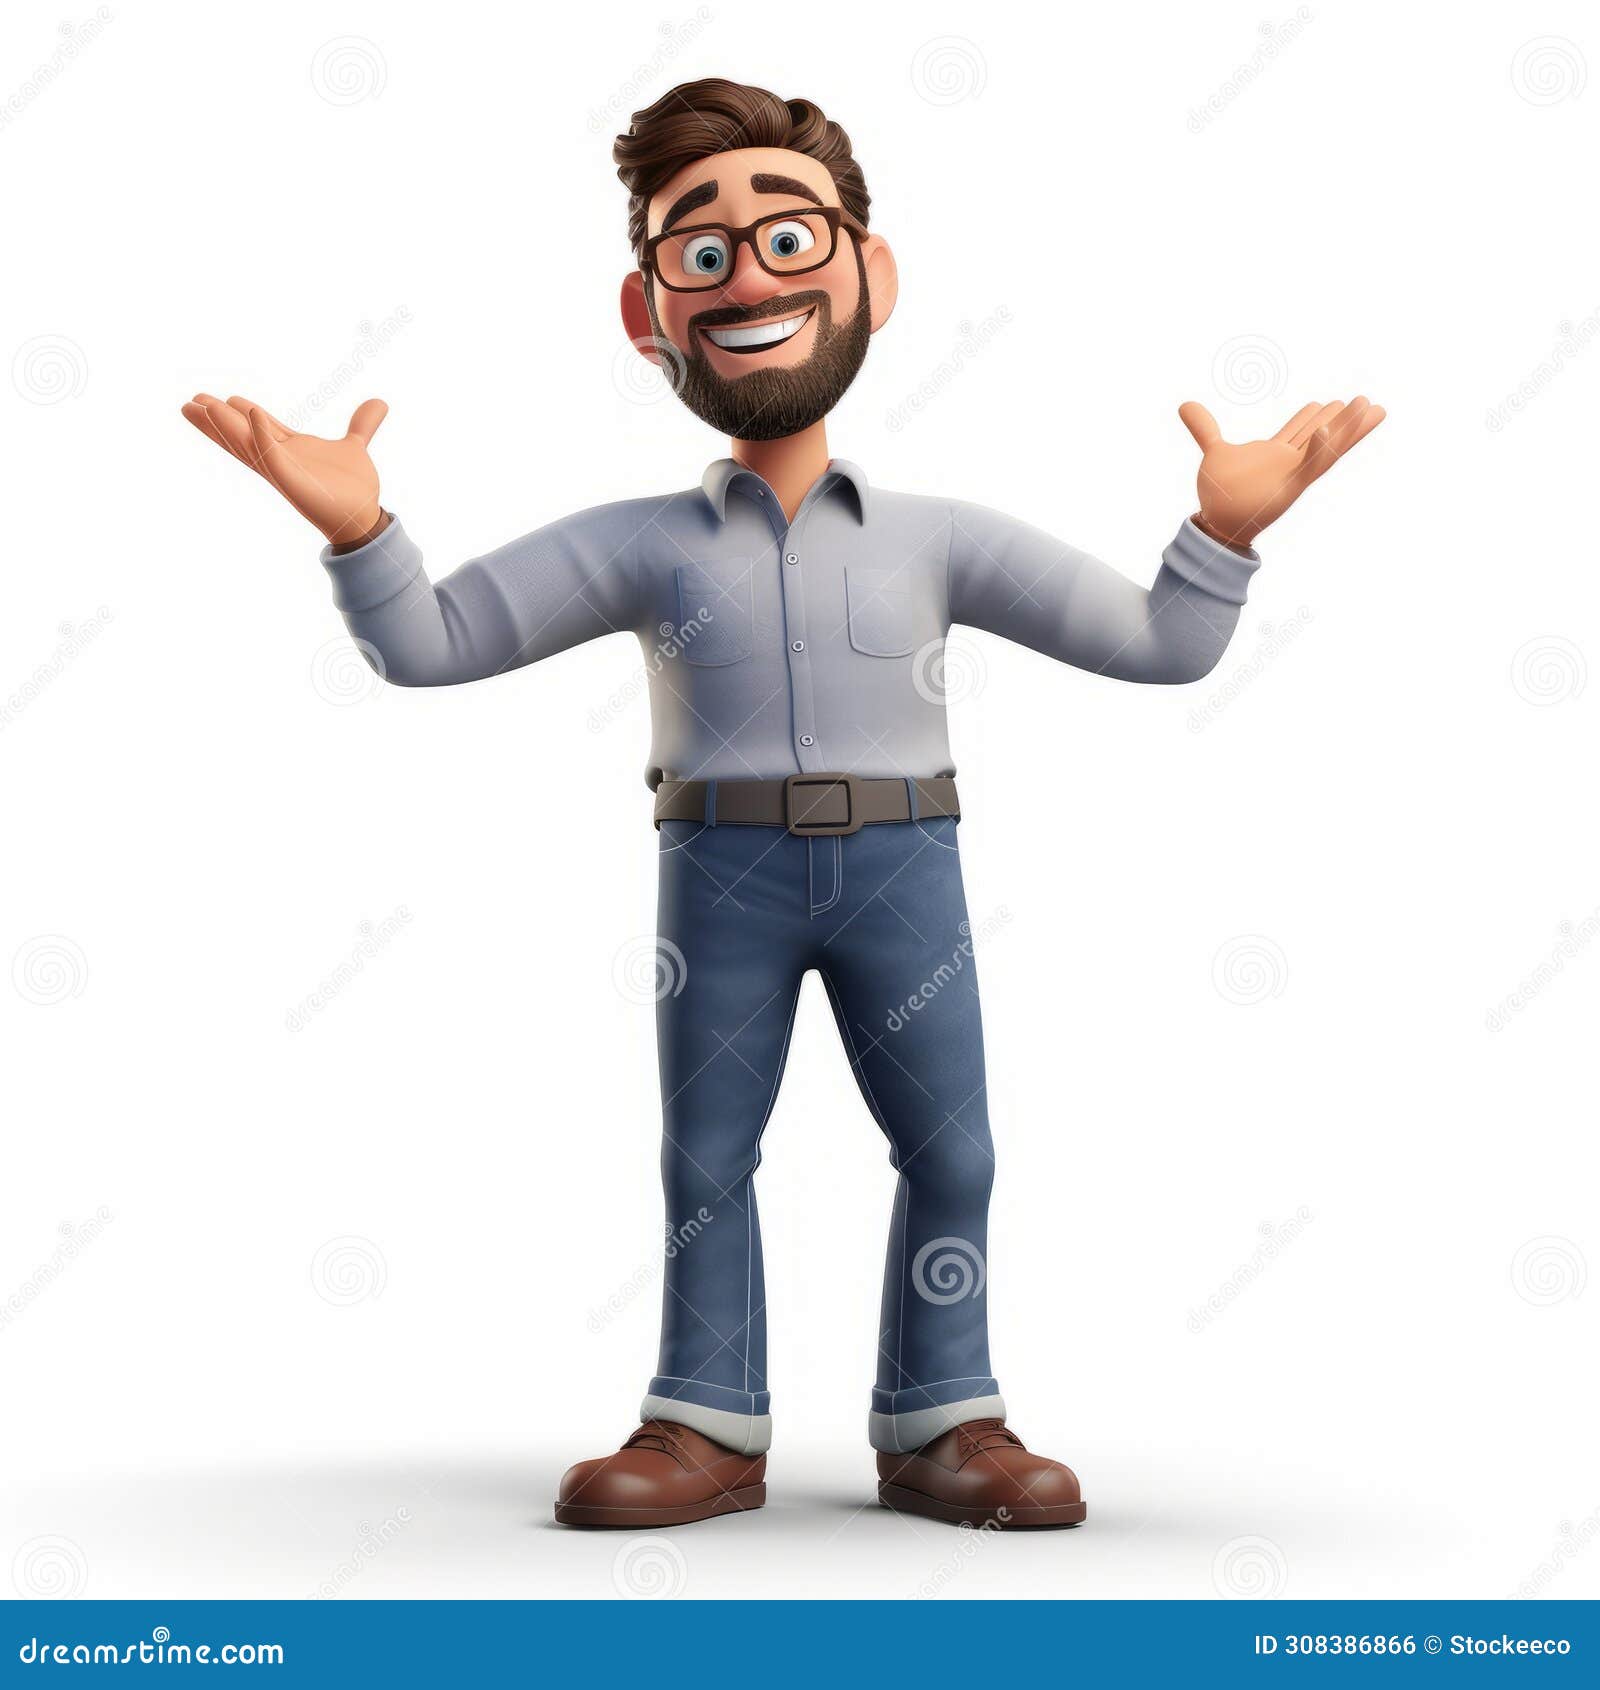 playful 3d character: bearded man with glasses and jeans